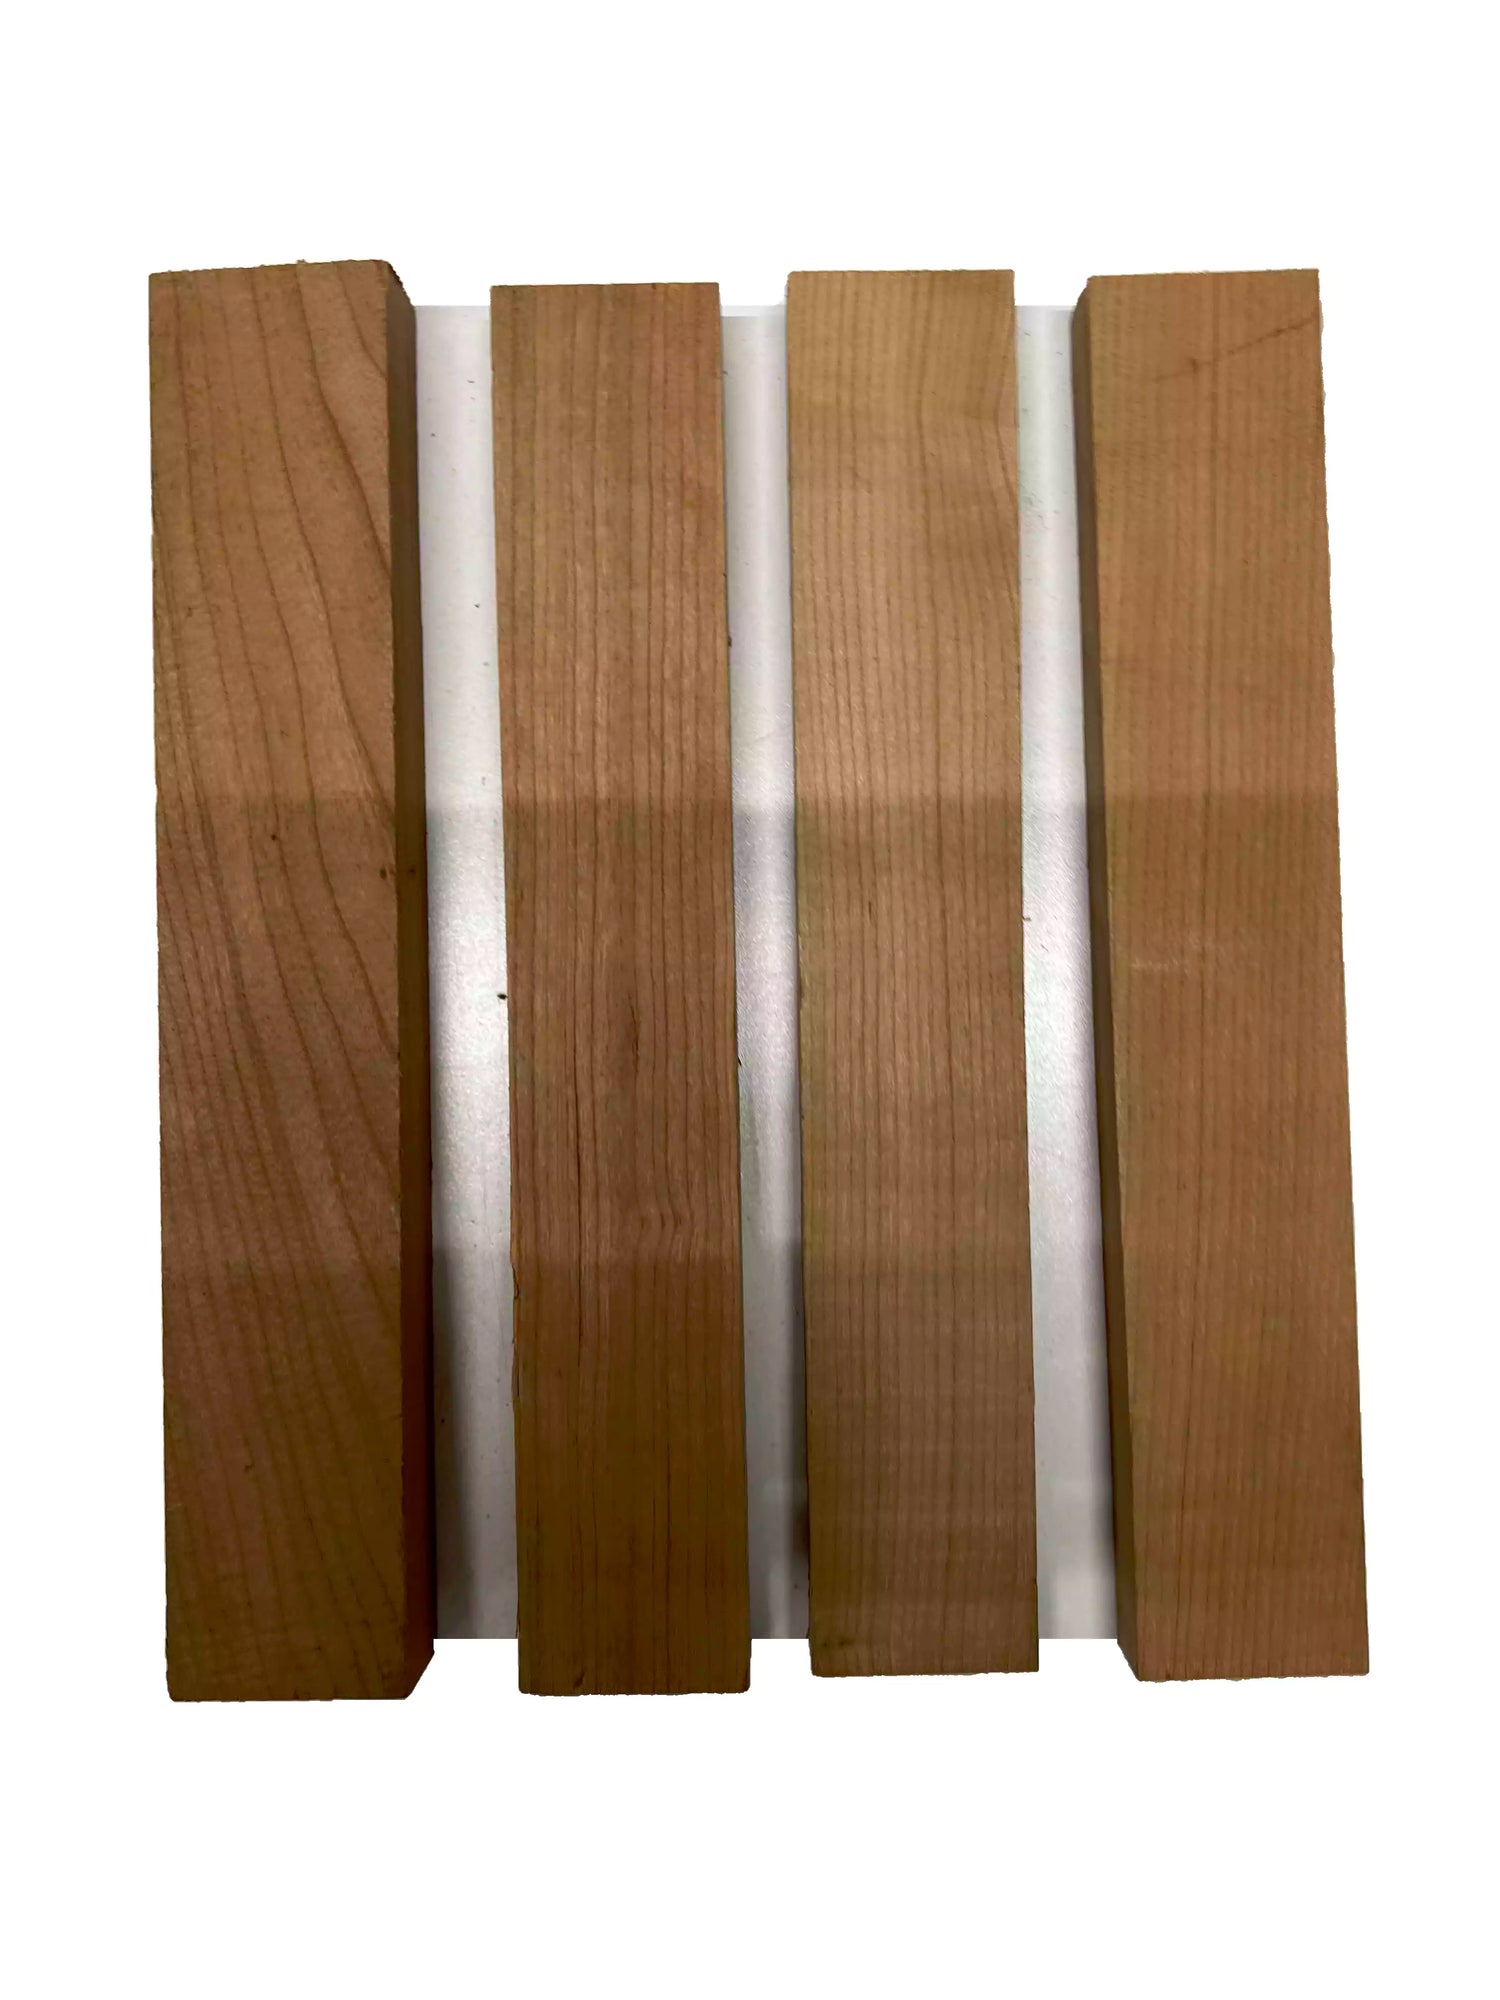 Pack of 4, Cherry Thin Stock Three Dimensional Lumber Board 12&quot; x 2&quot; x 3/4&quot; 